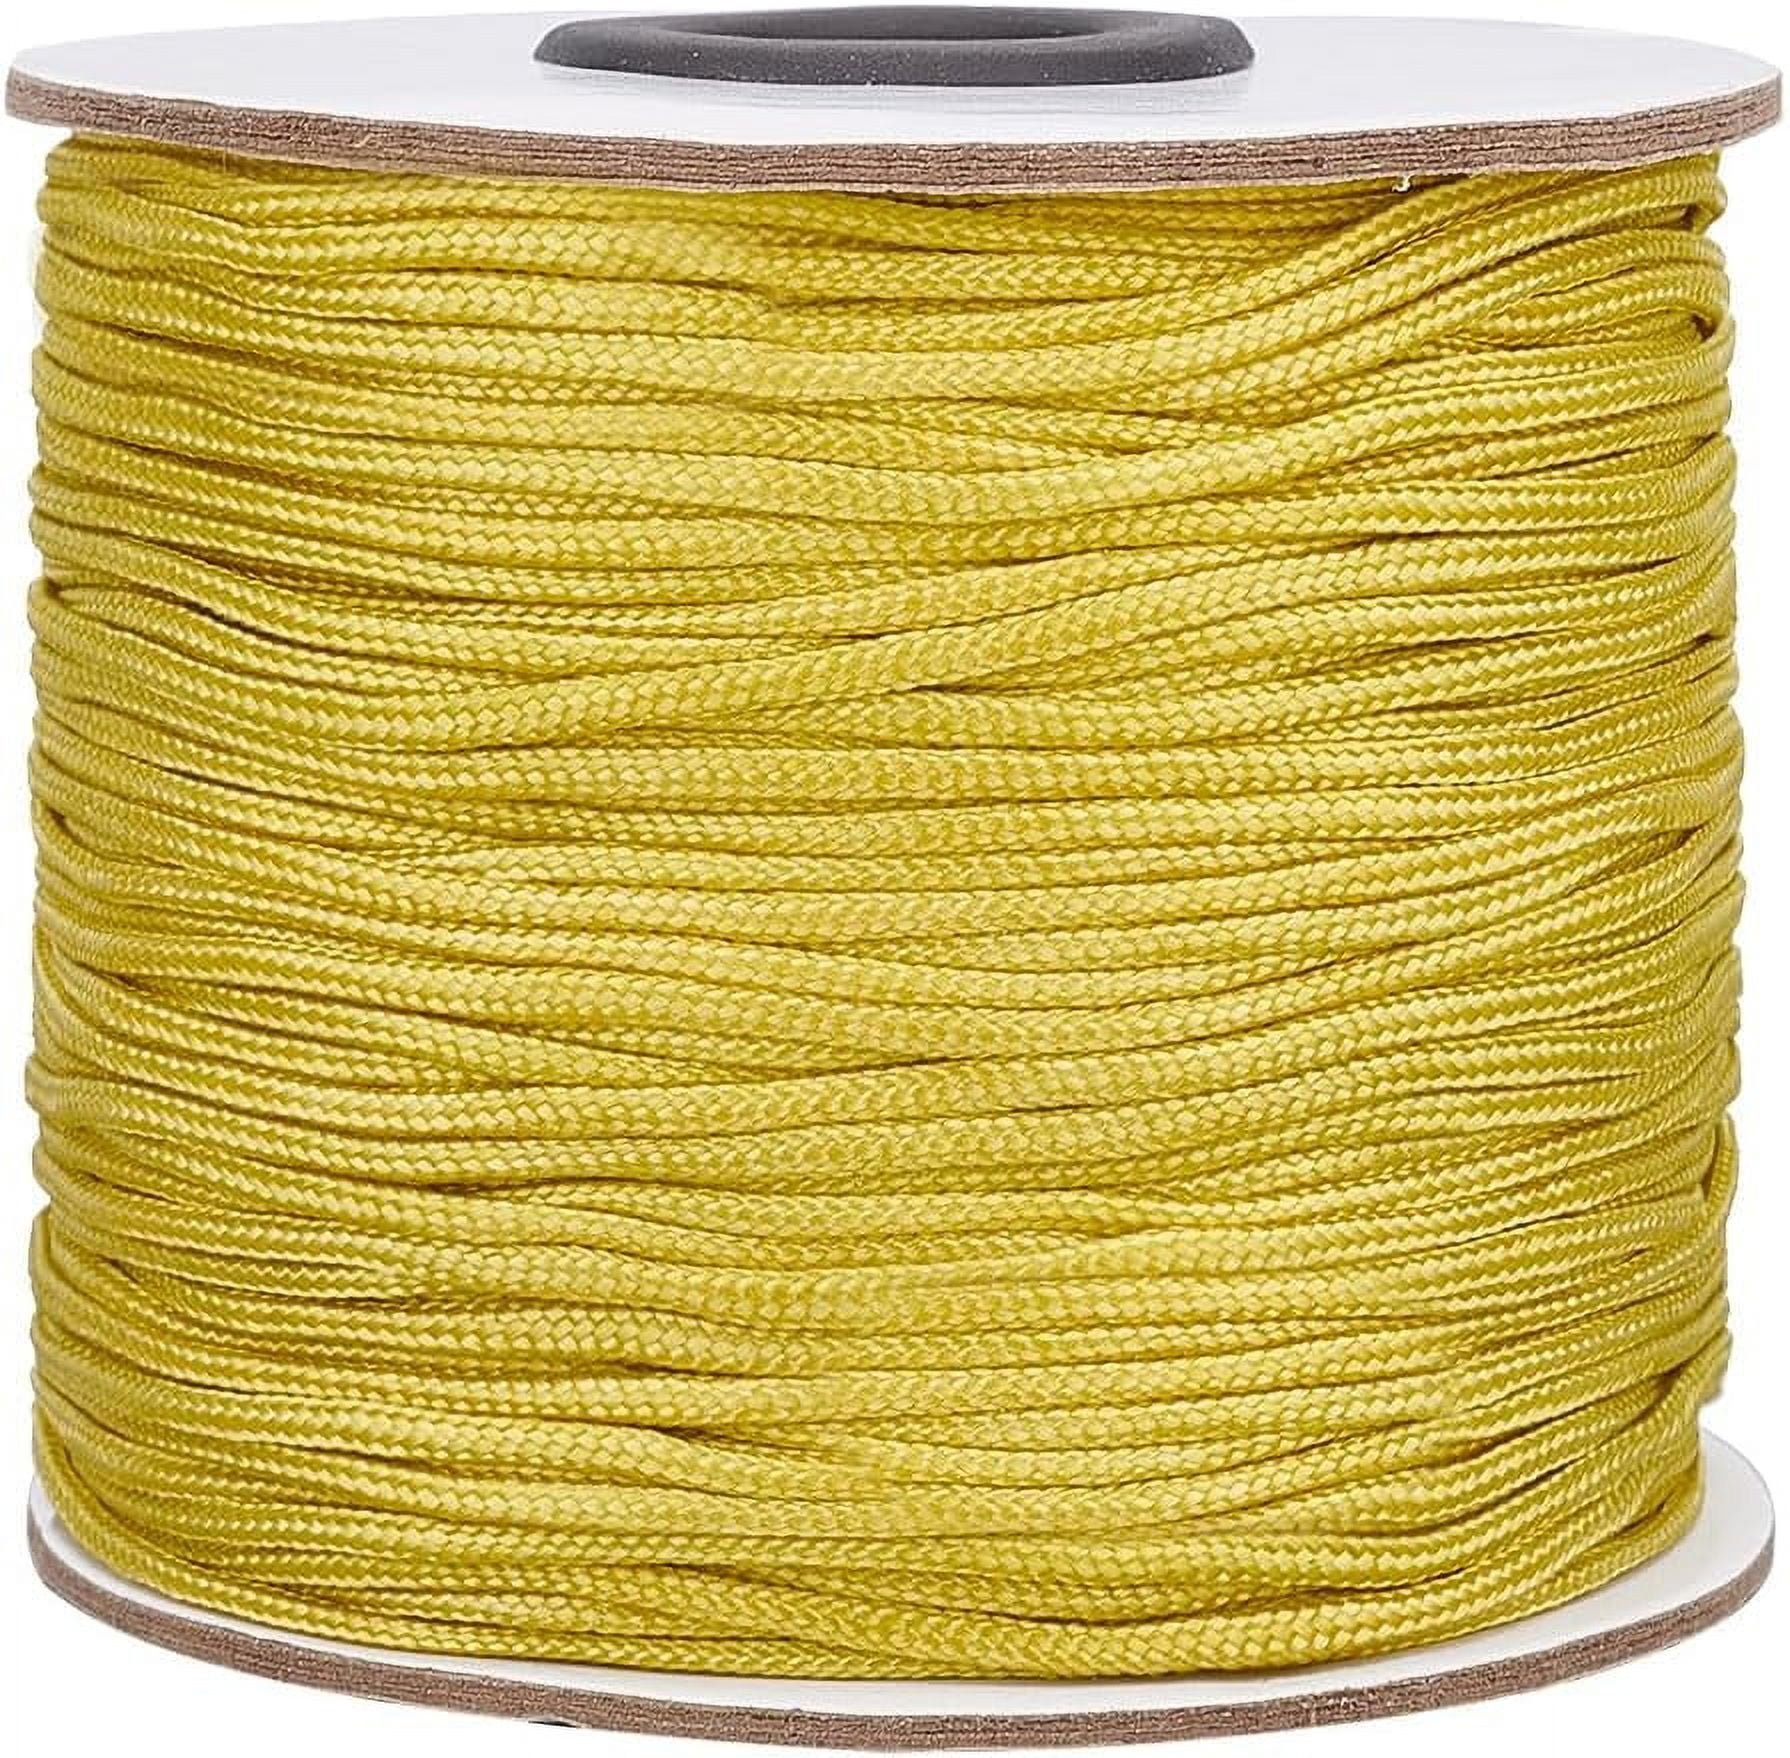 NOBRAND Knotted Ropes in Camping Gear 